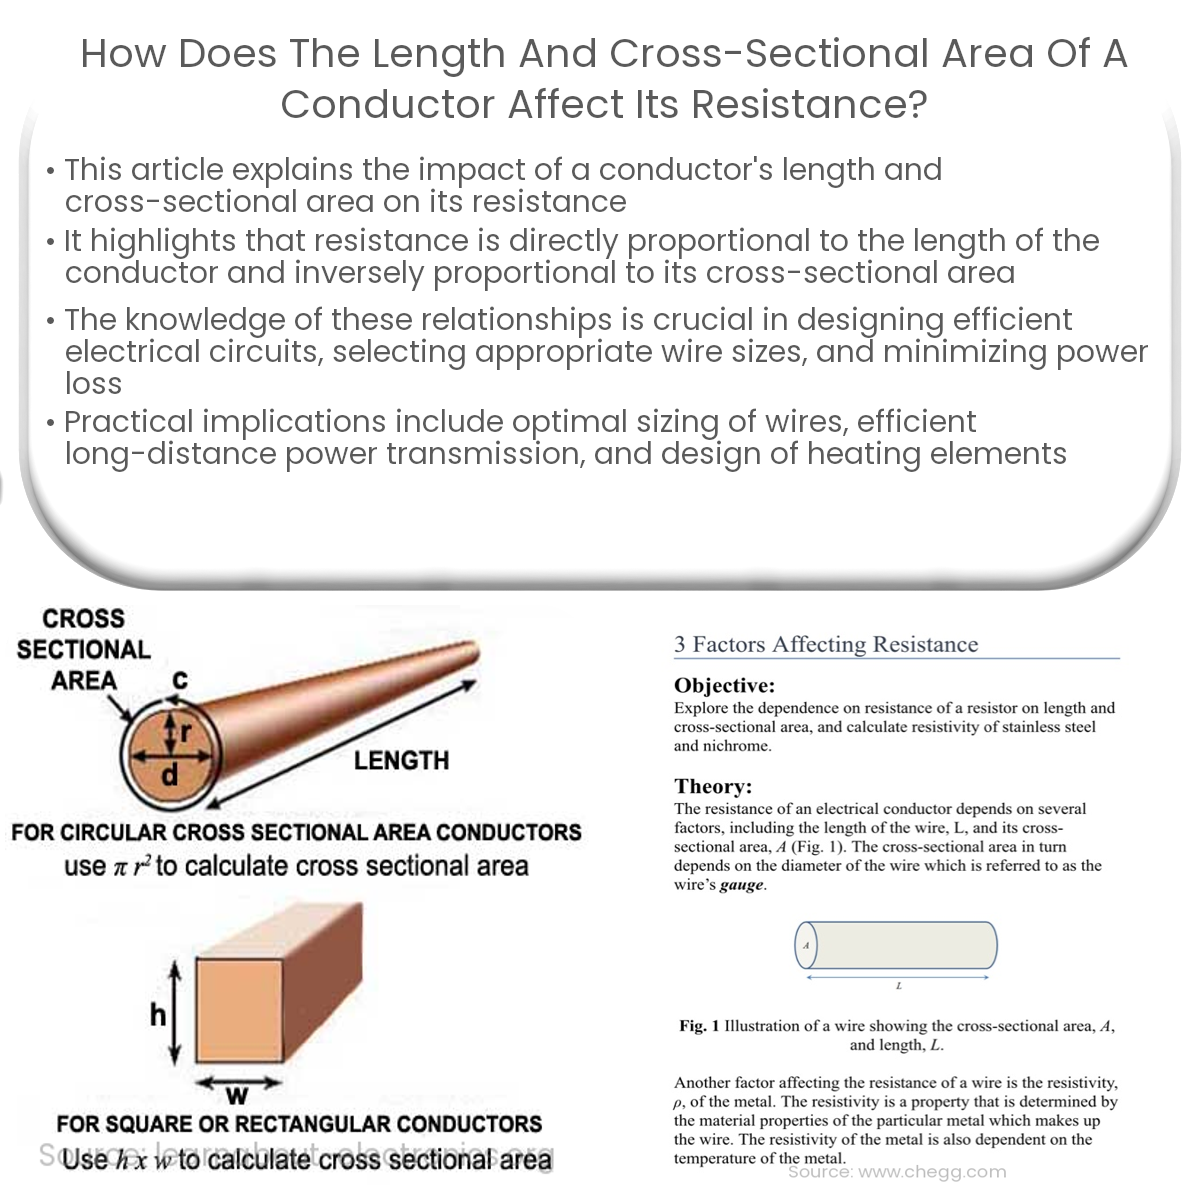 How does the length and cross-sectional area of a conductor affect its resistance?